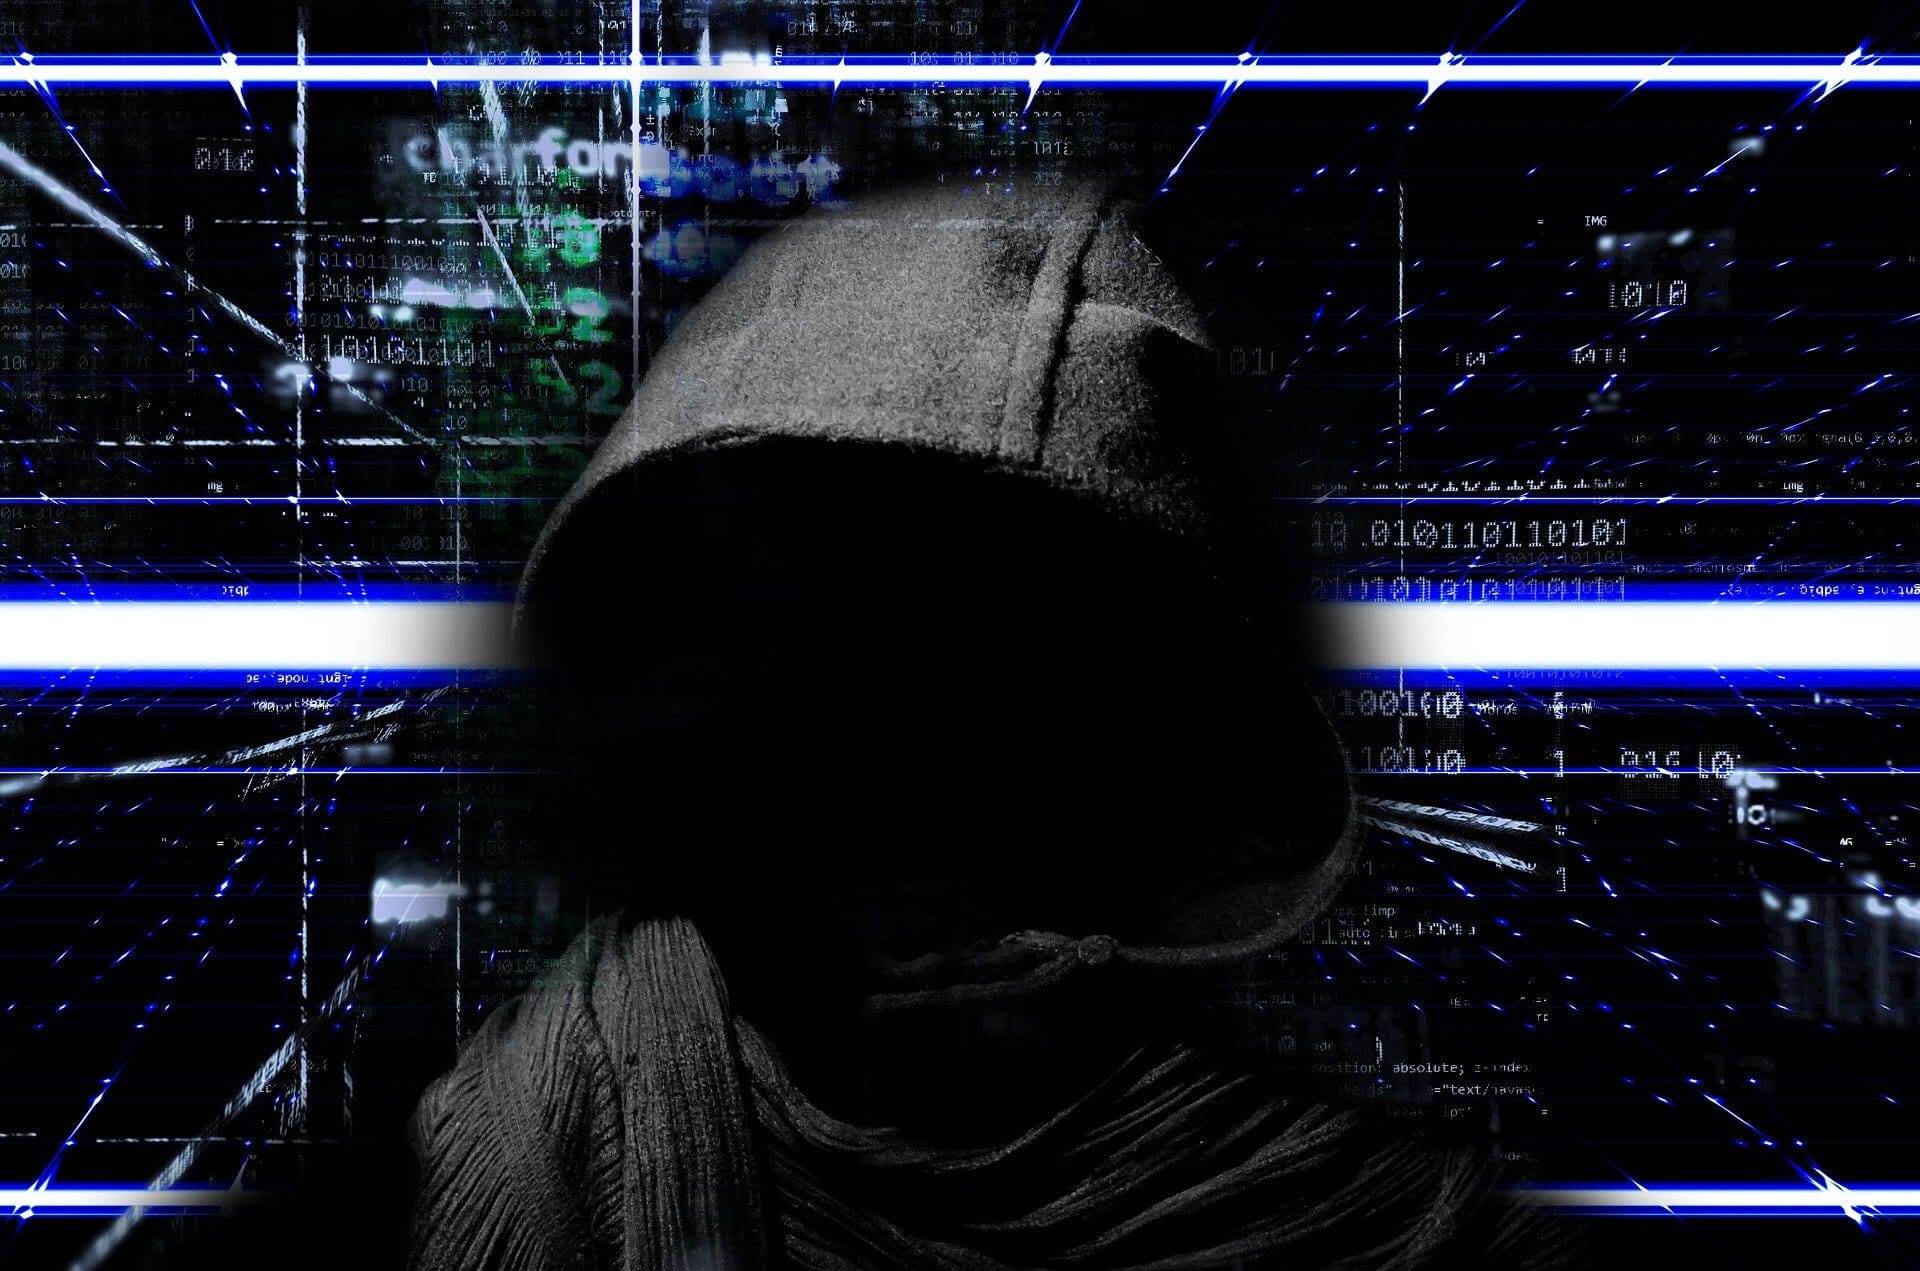 $117M Hacker scheduled to keep $47M as bug bounty, here is why